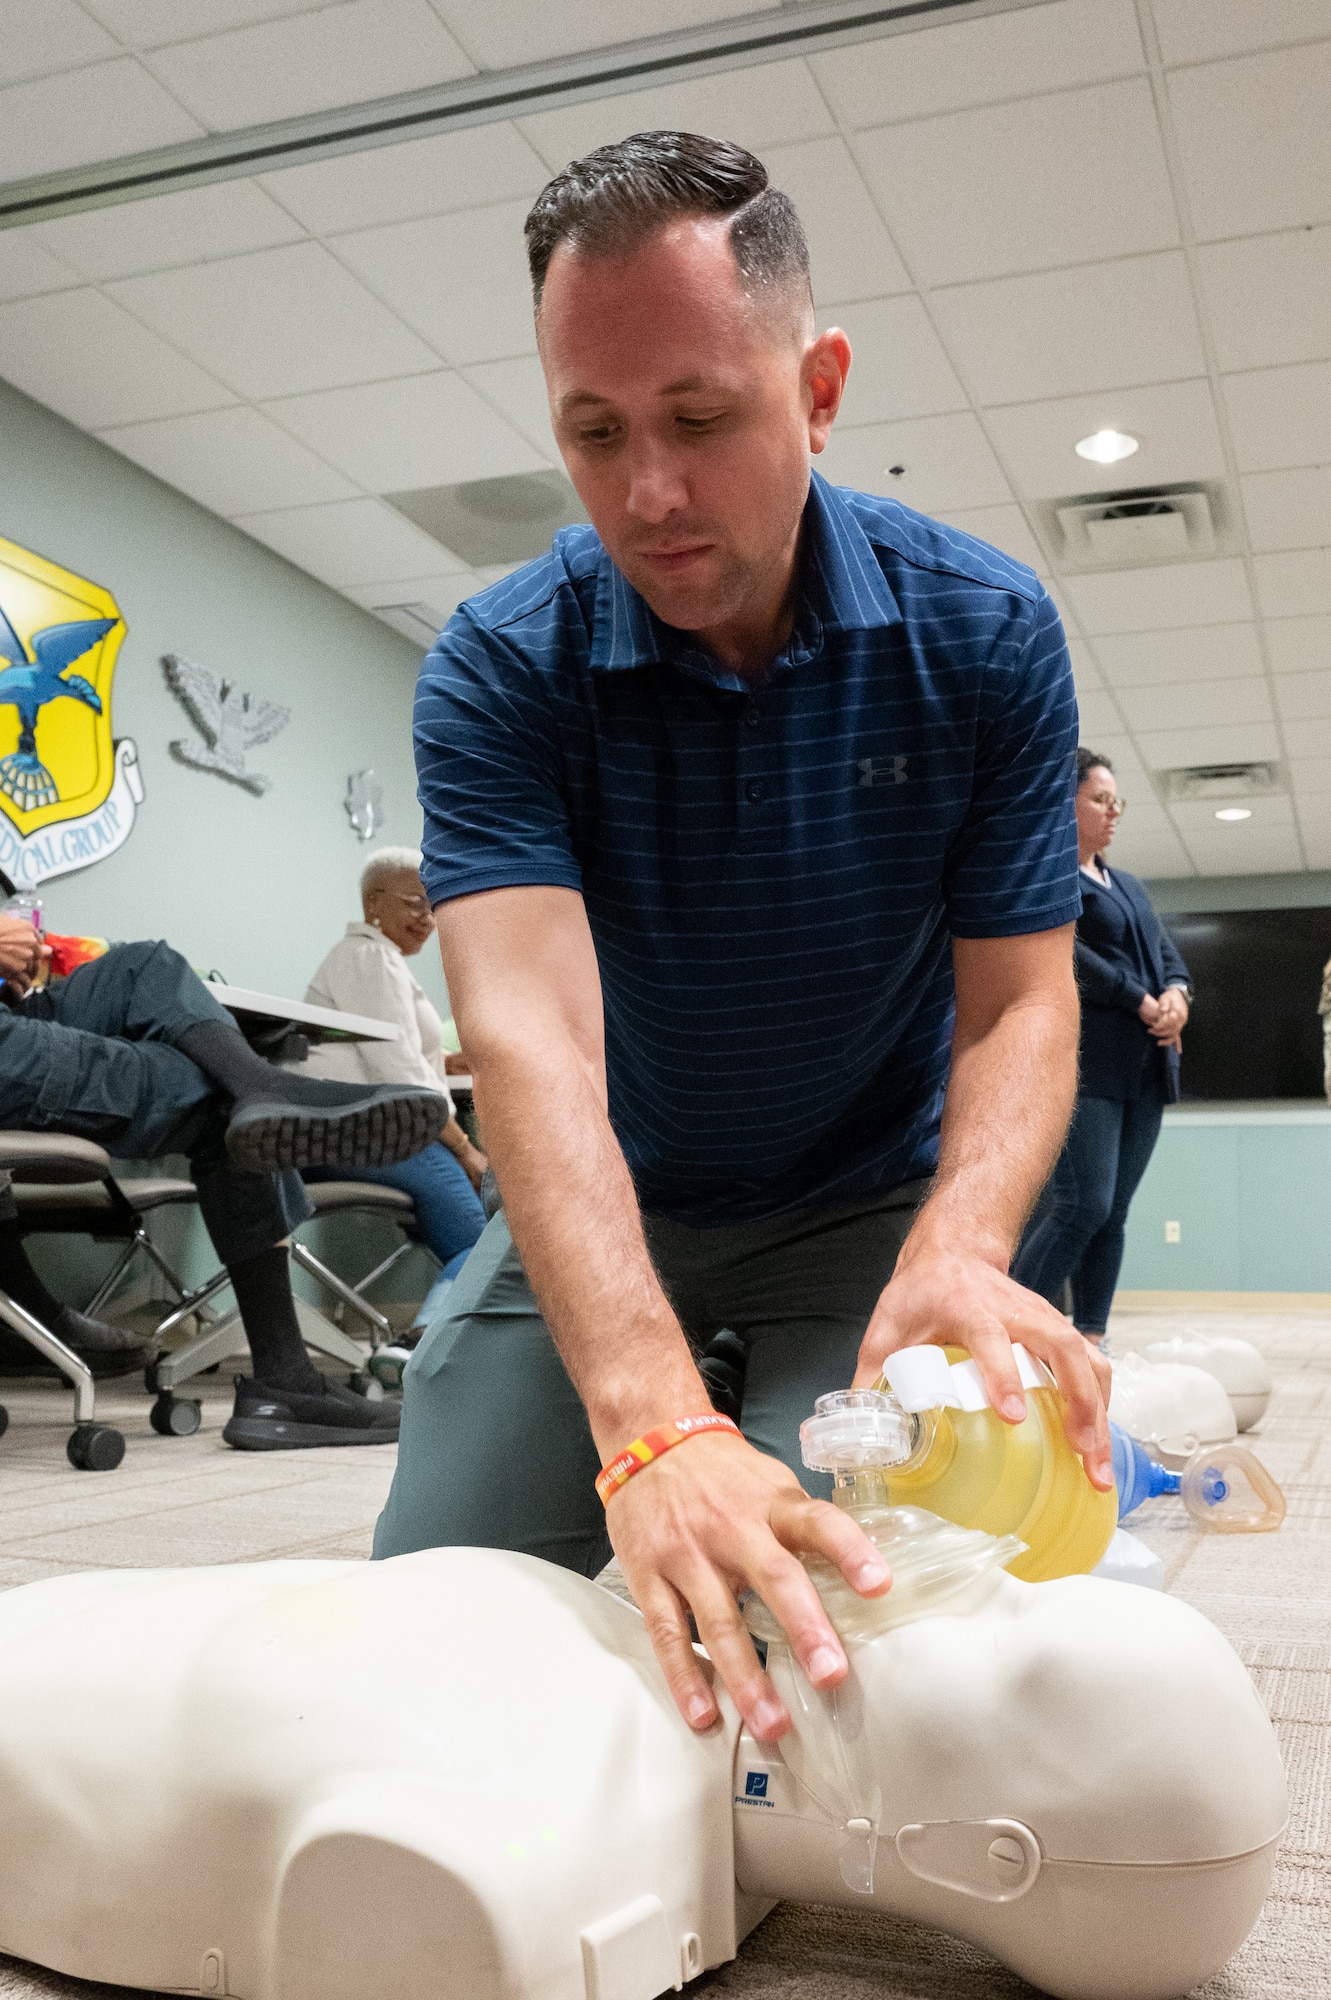 Robby Sheehan, 512th Airlift Wing honorary commander, practices CPR during a tour at Dover Air Force Base, Delaware, July 28, 2023. The honorary commanders toured various departments within the 436th Medical Group to familiarize them with their mission and capabilities. (U.S. Air Force photo by Mauricio Campino)